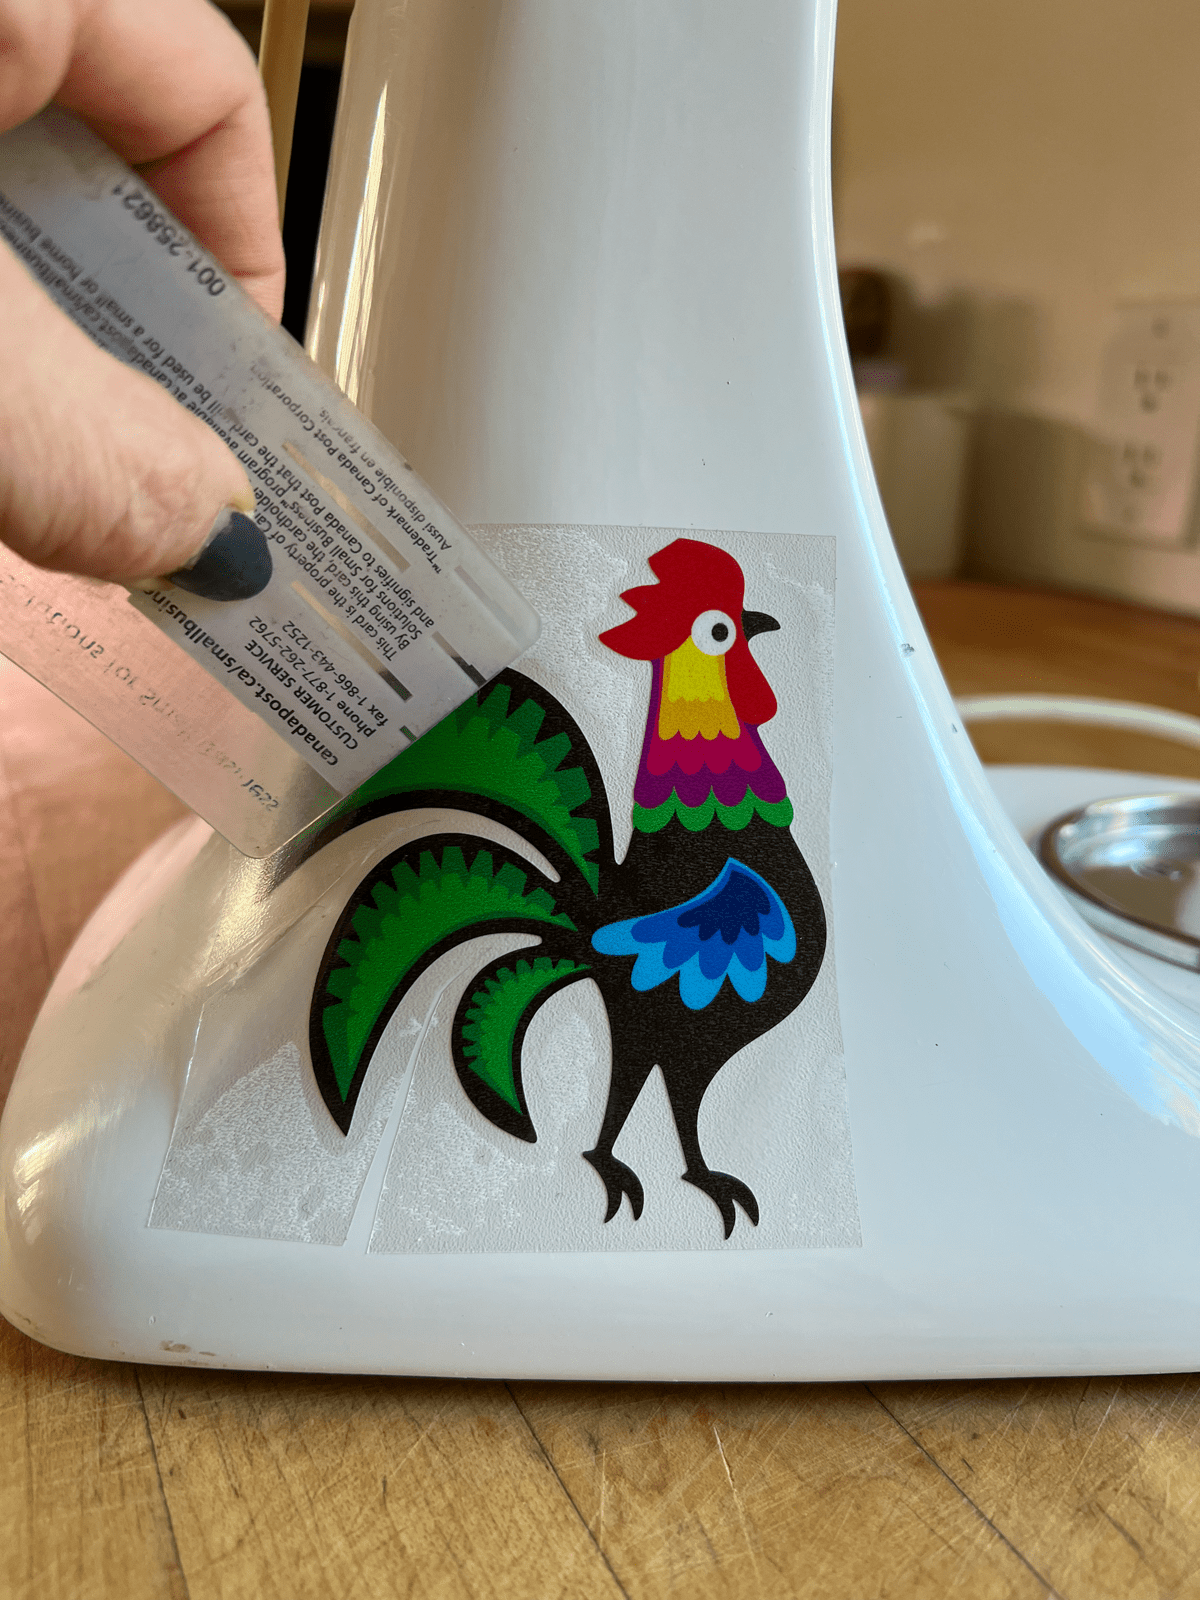 Applying vinyl decal to stand mixer.